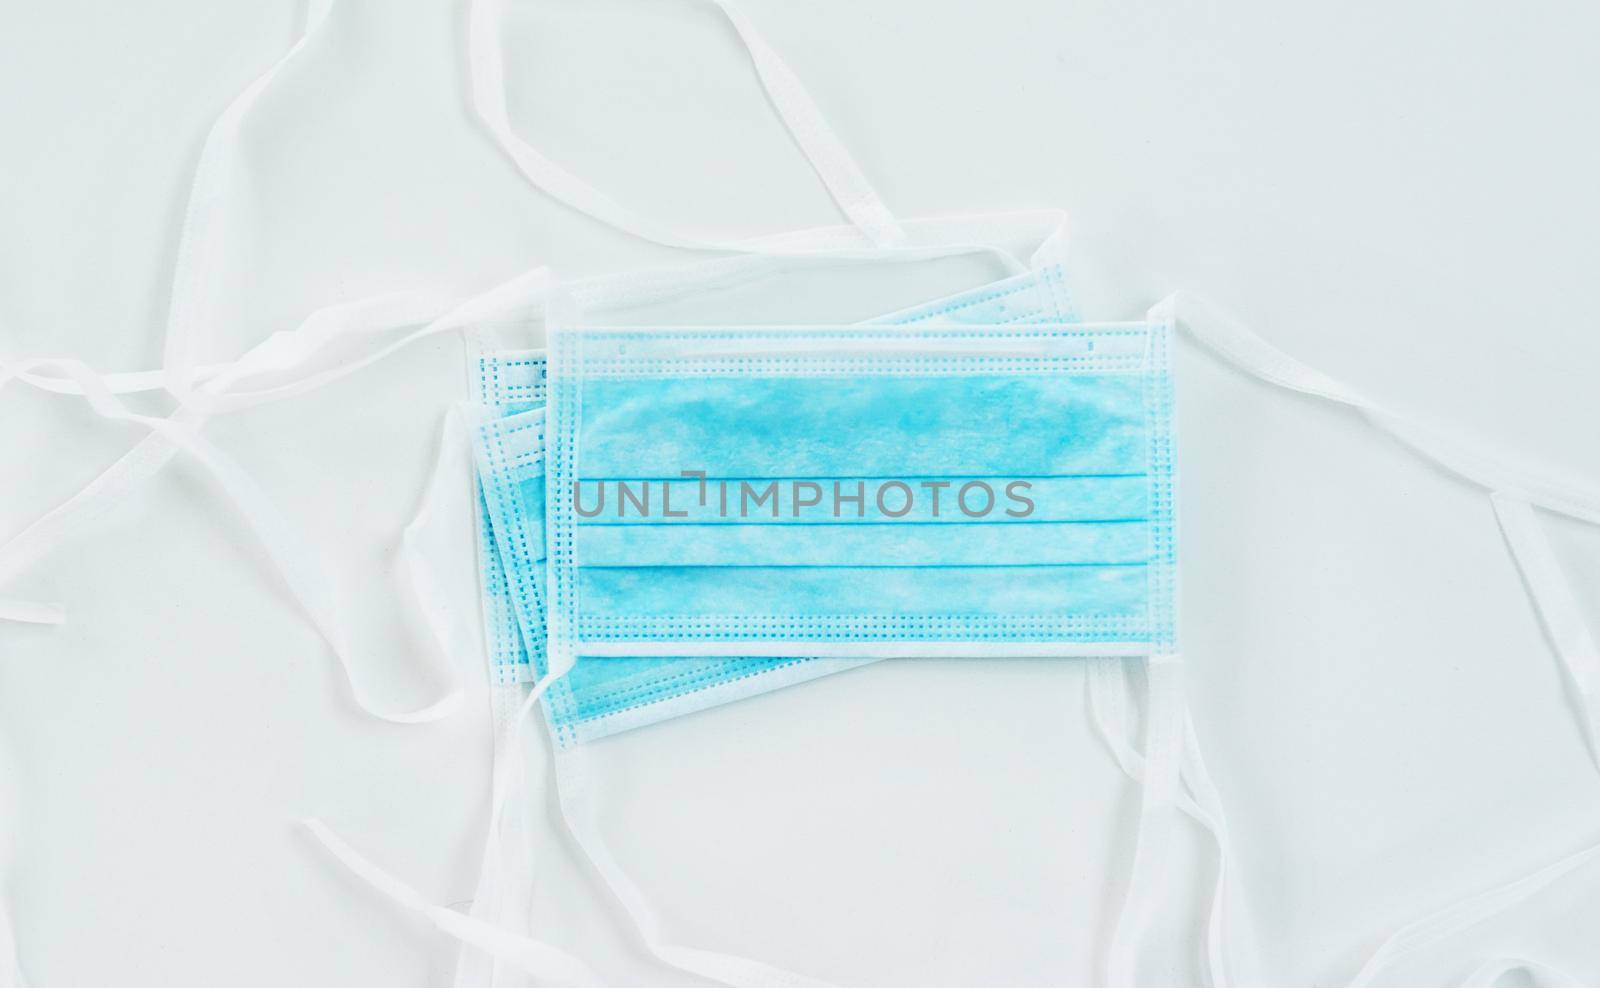 The most important accessory during this pandemic. Shot of surgical masks against a white background. by YuriArcurs